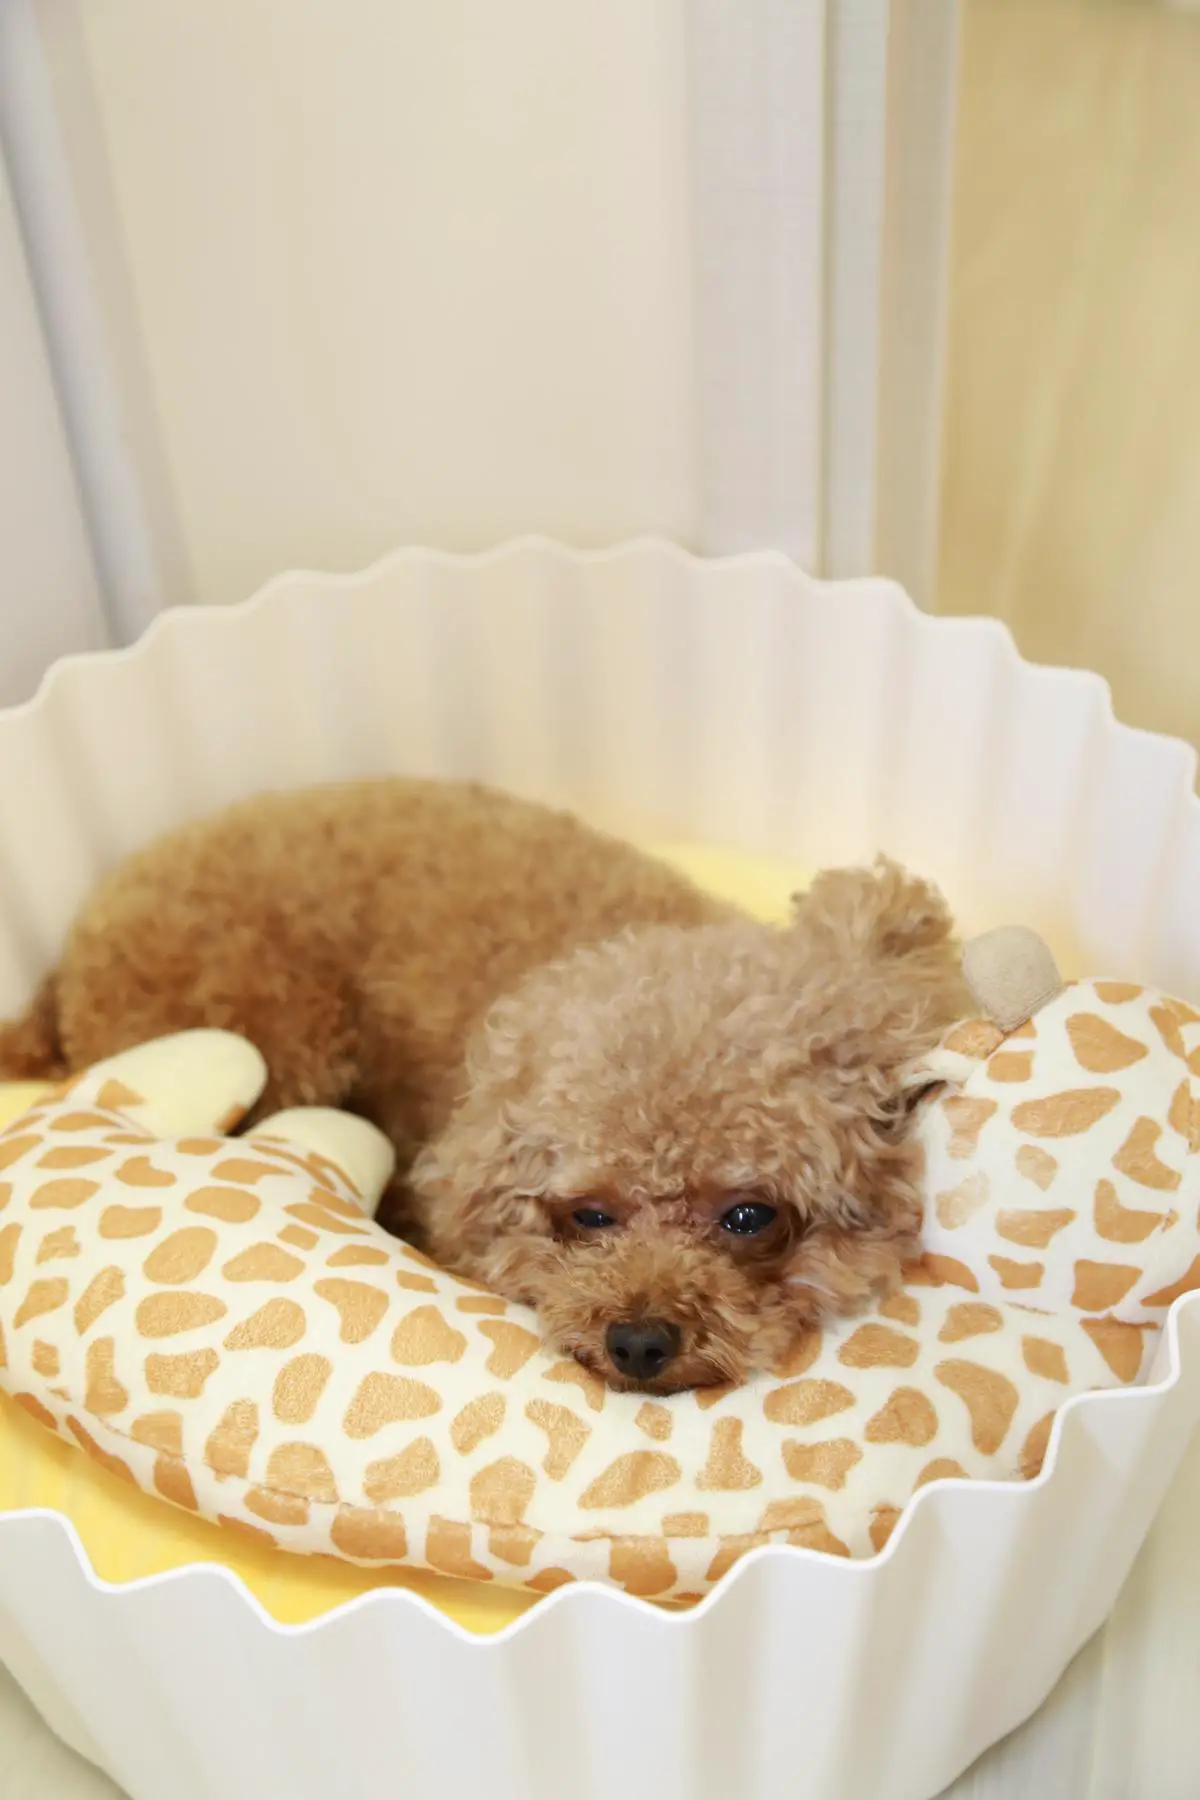 A teacup poodle curled up in a blanket, looking relaxed and happy.